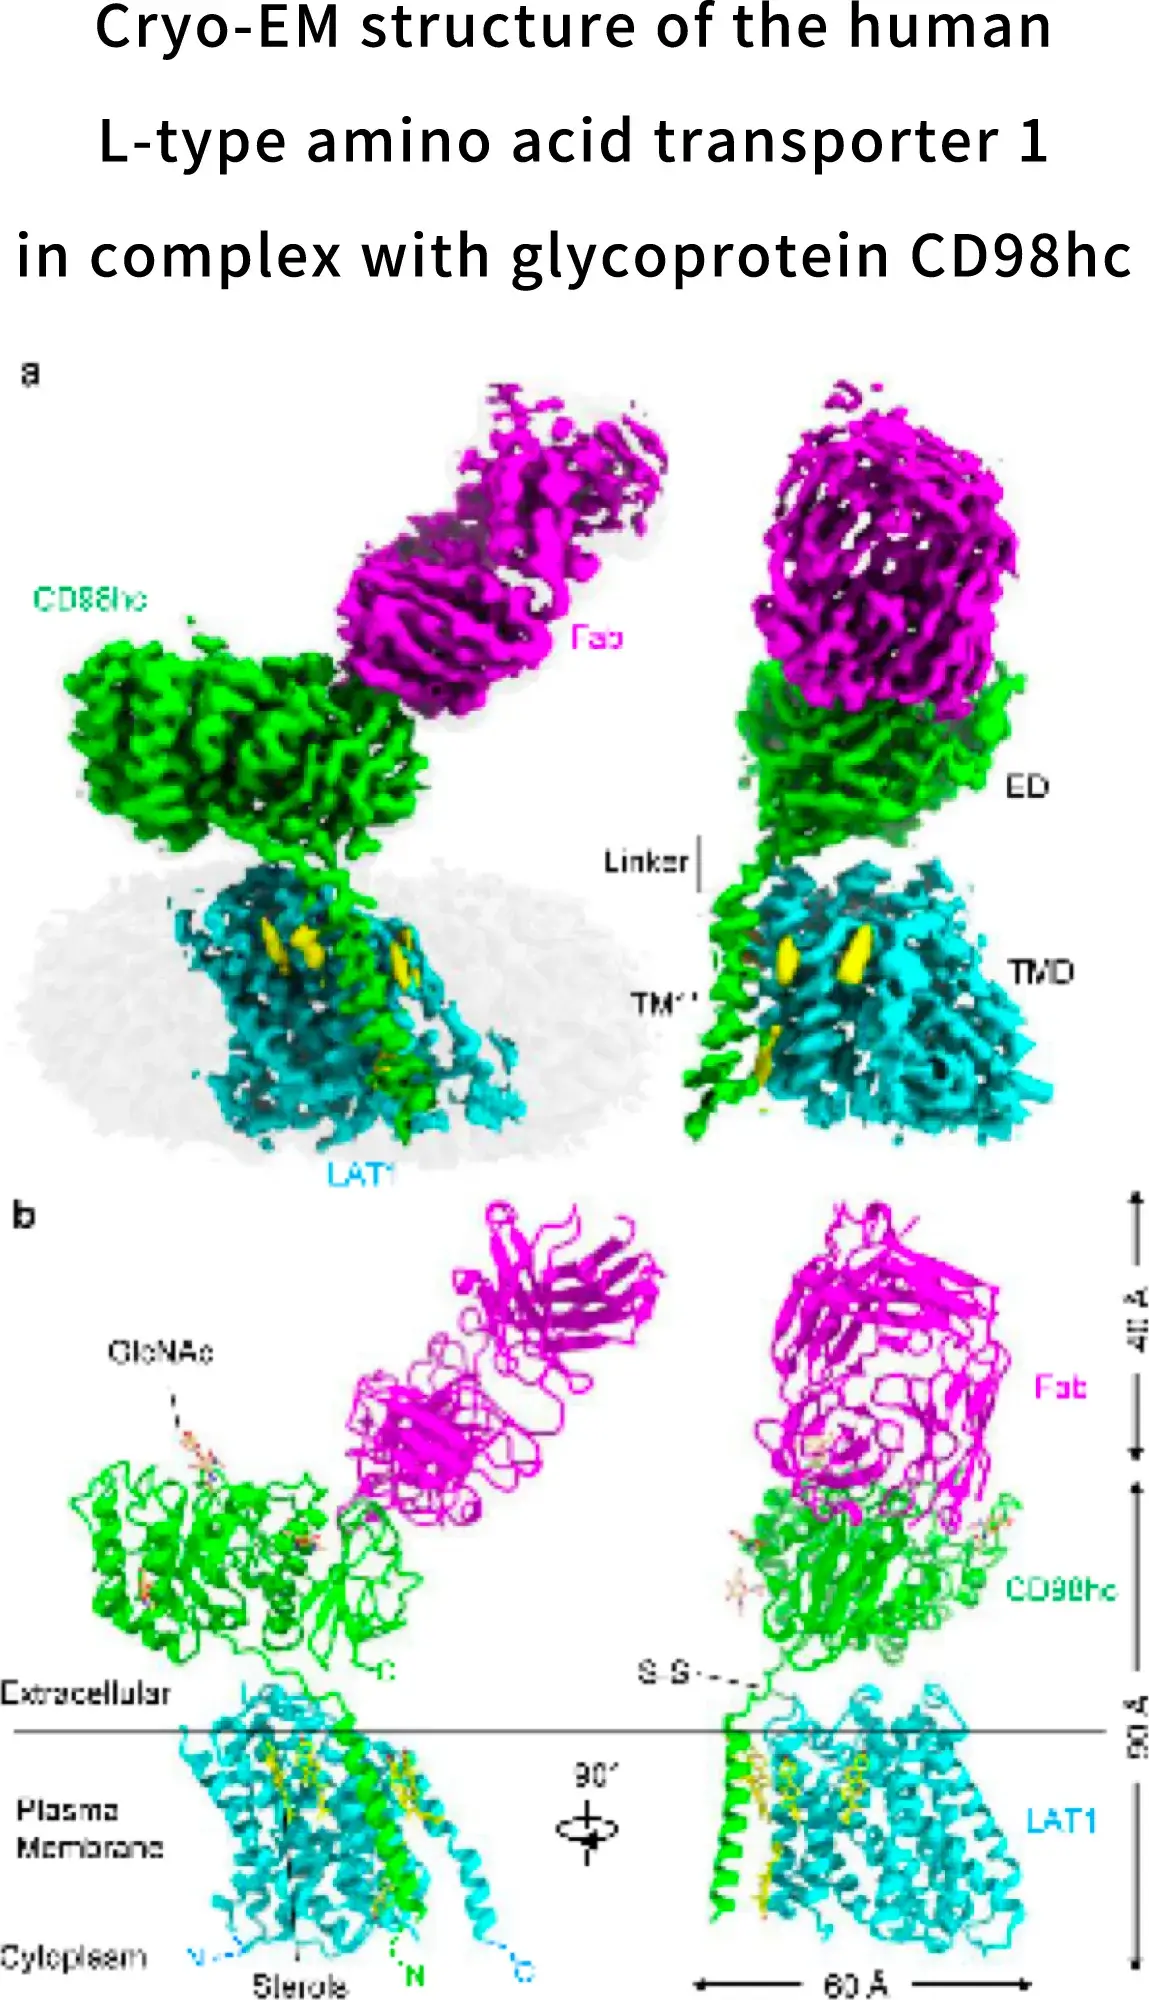 Cryo-EM structure of the human L-type amino acid transporter 1 in complex with glycoprotein CD98hc